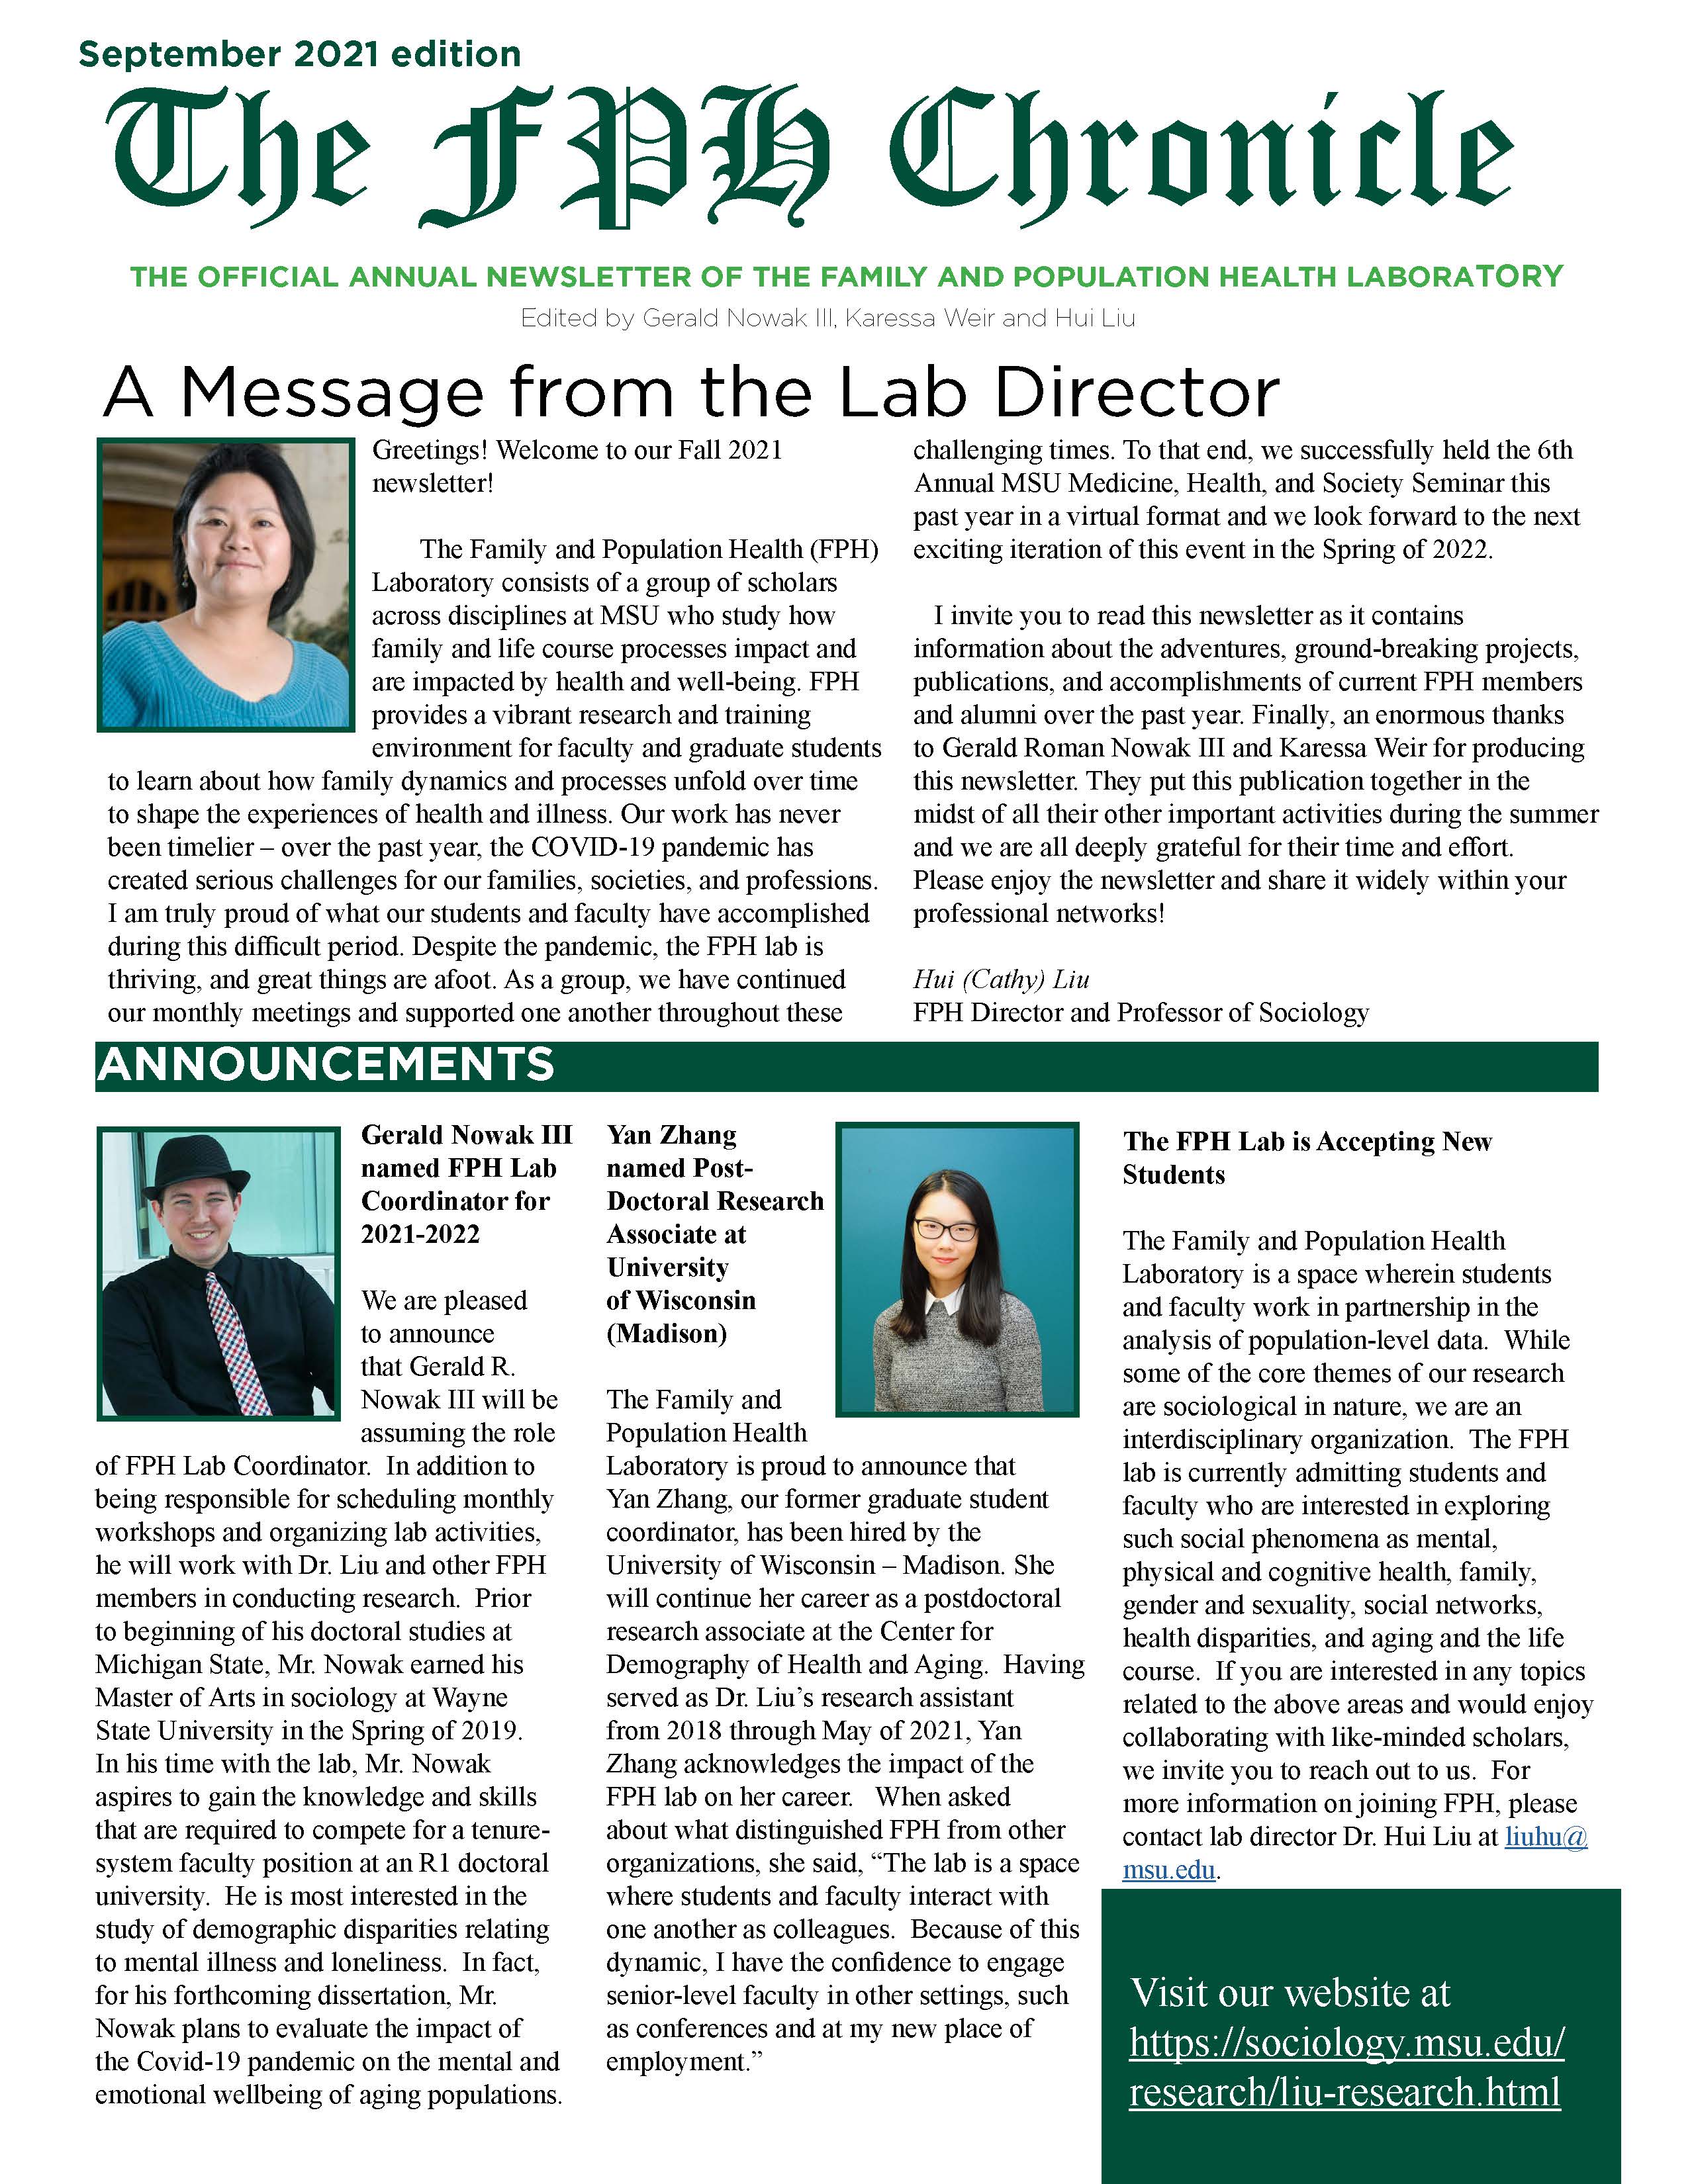 Extra! Extra! New newsletter released from the Family and Population Health Laboratory